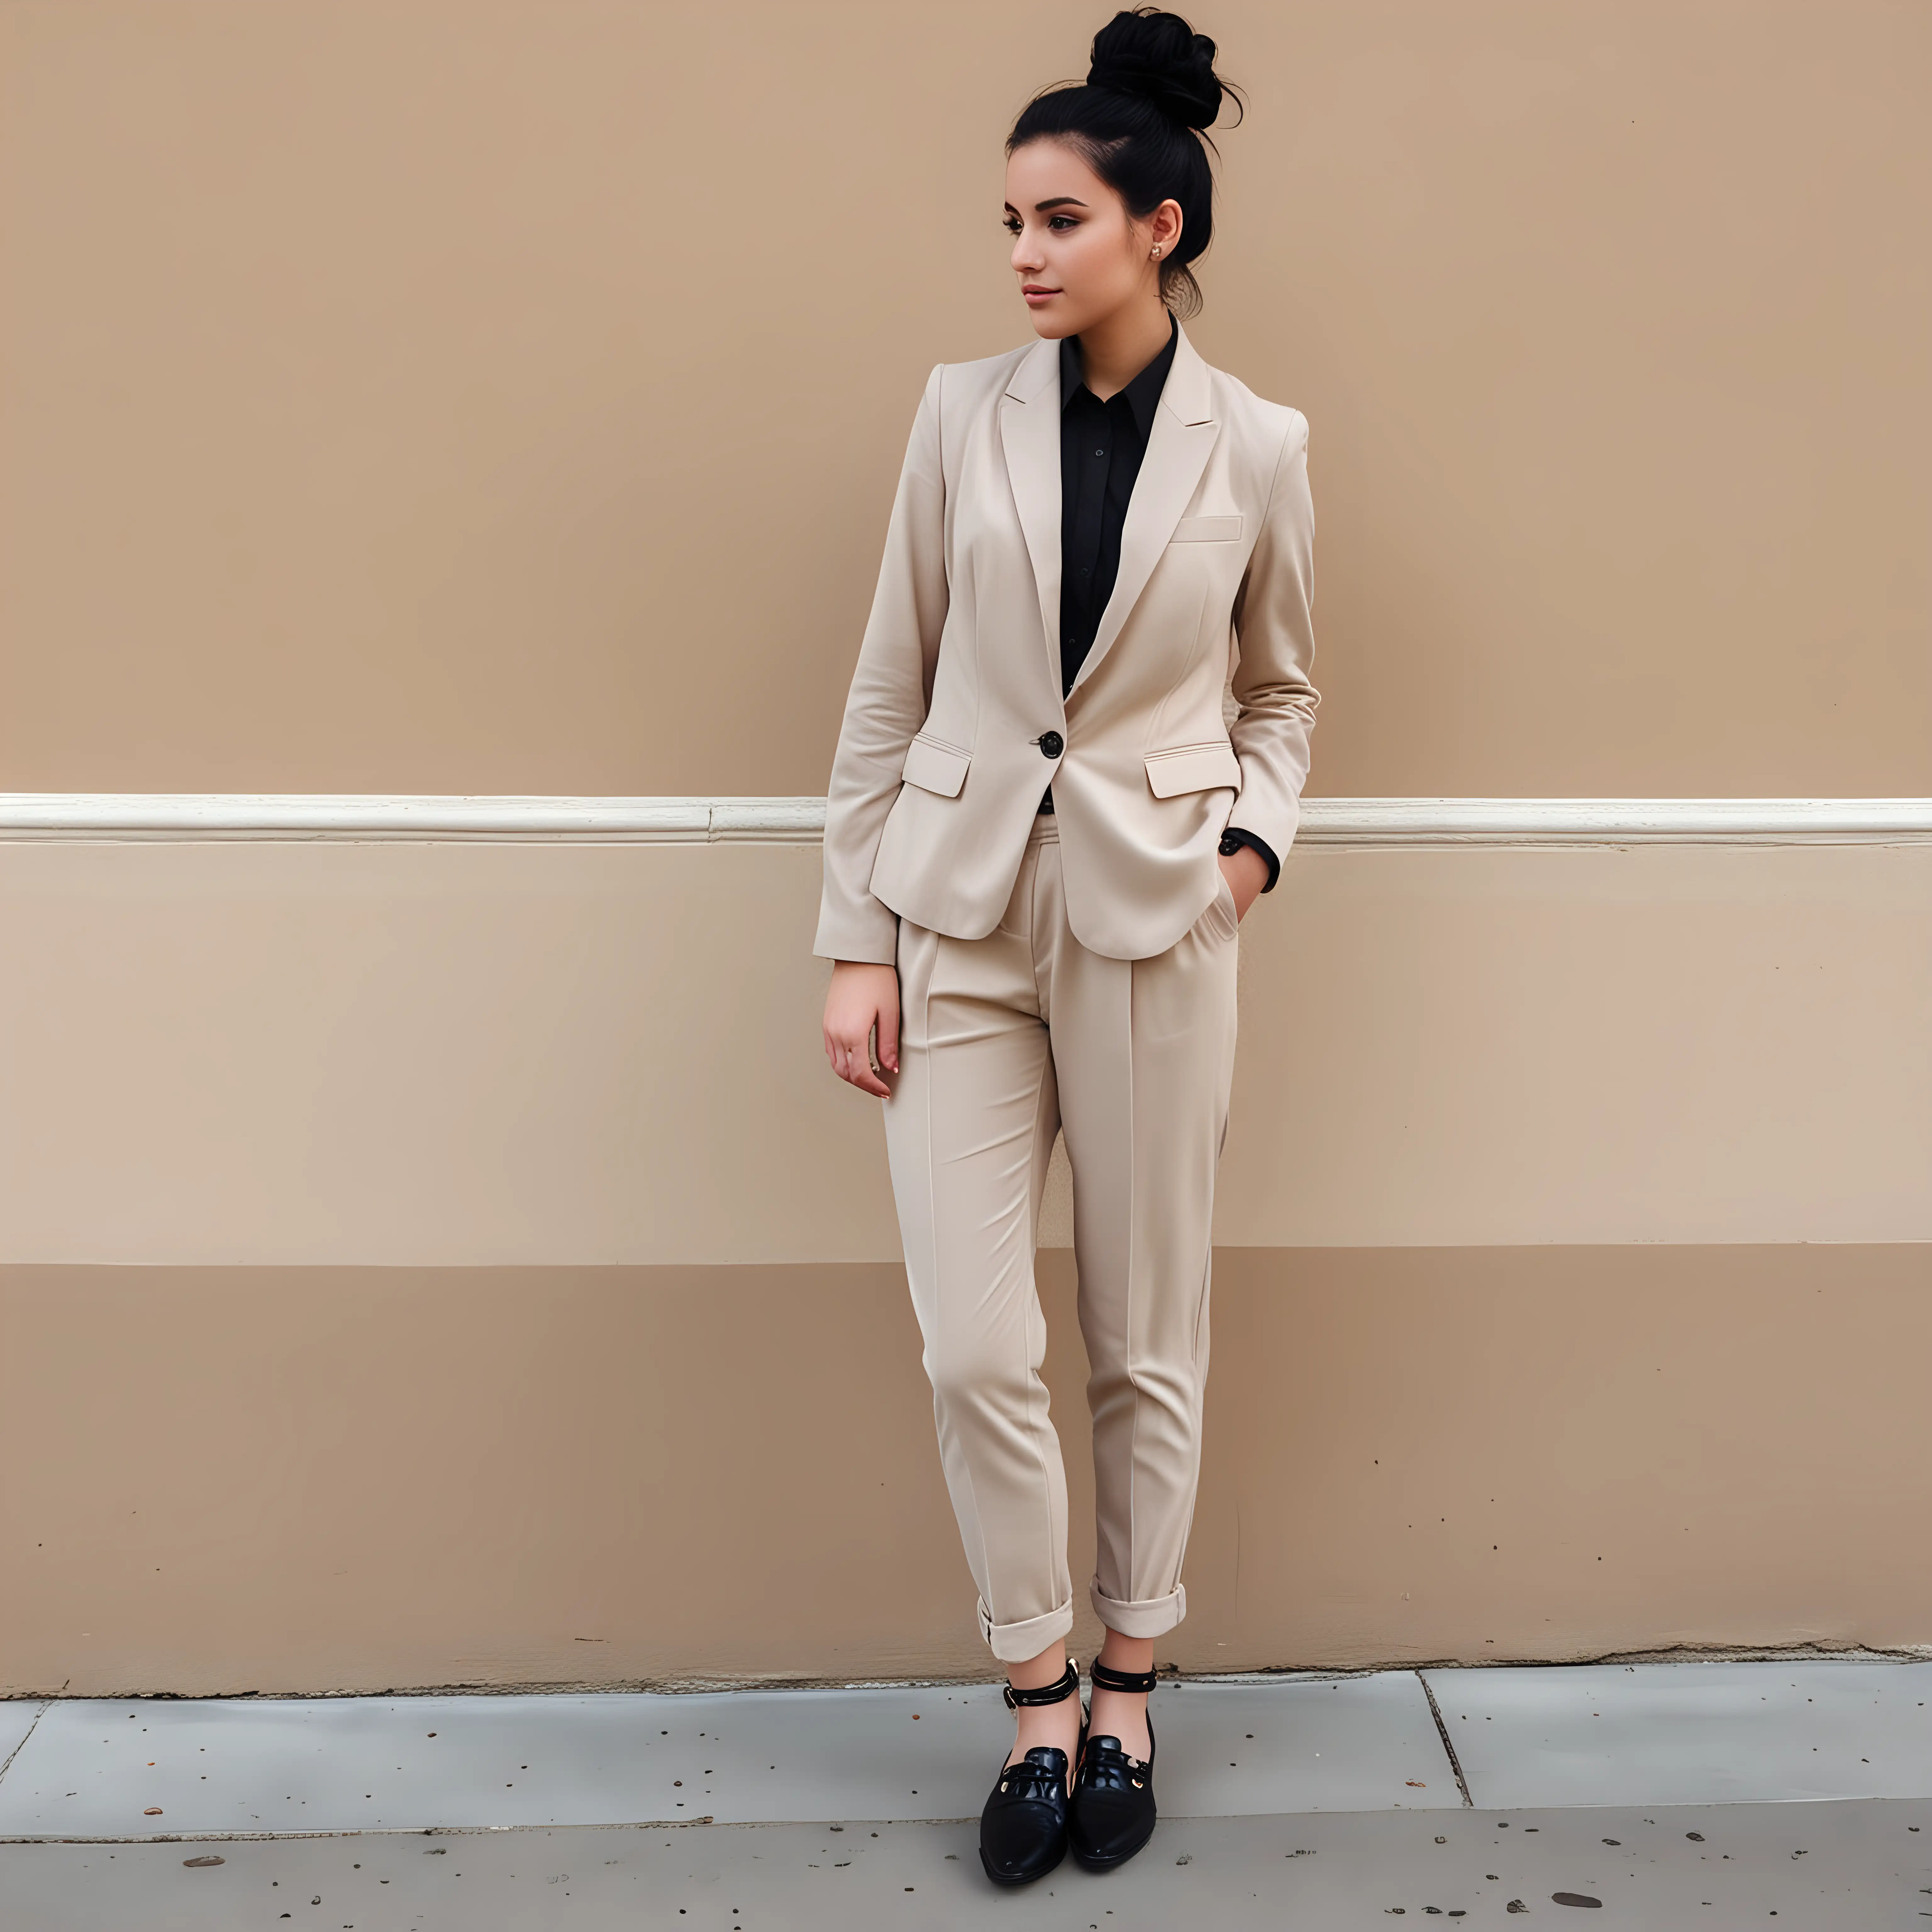 goth emo teenage girl with black hair in a bun wearing a neutral color tailored outfit and blazer, fancy pants and professional blouse for a job interview. should look like a teen girl full body outfit with closed toe flats for shoes.